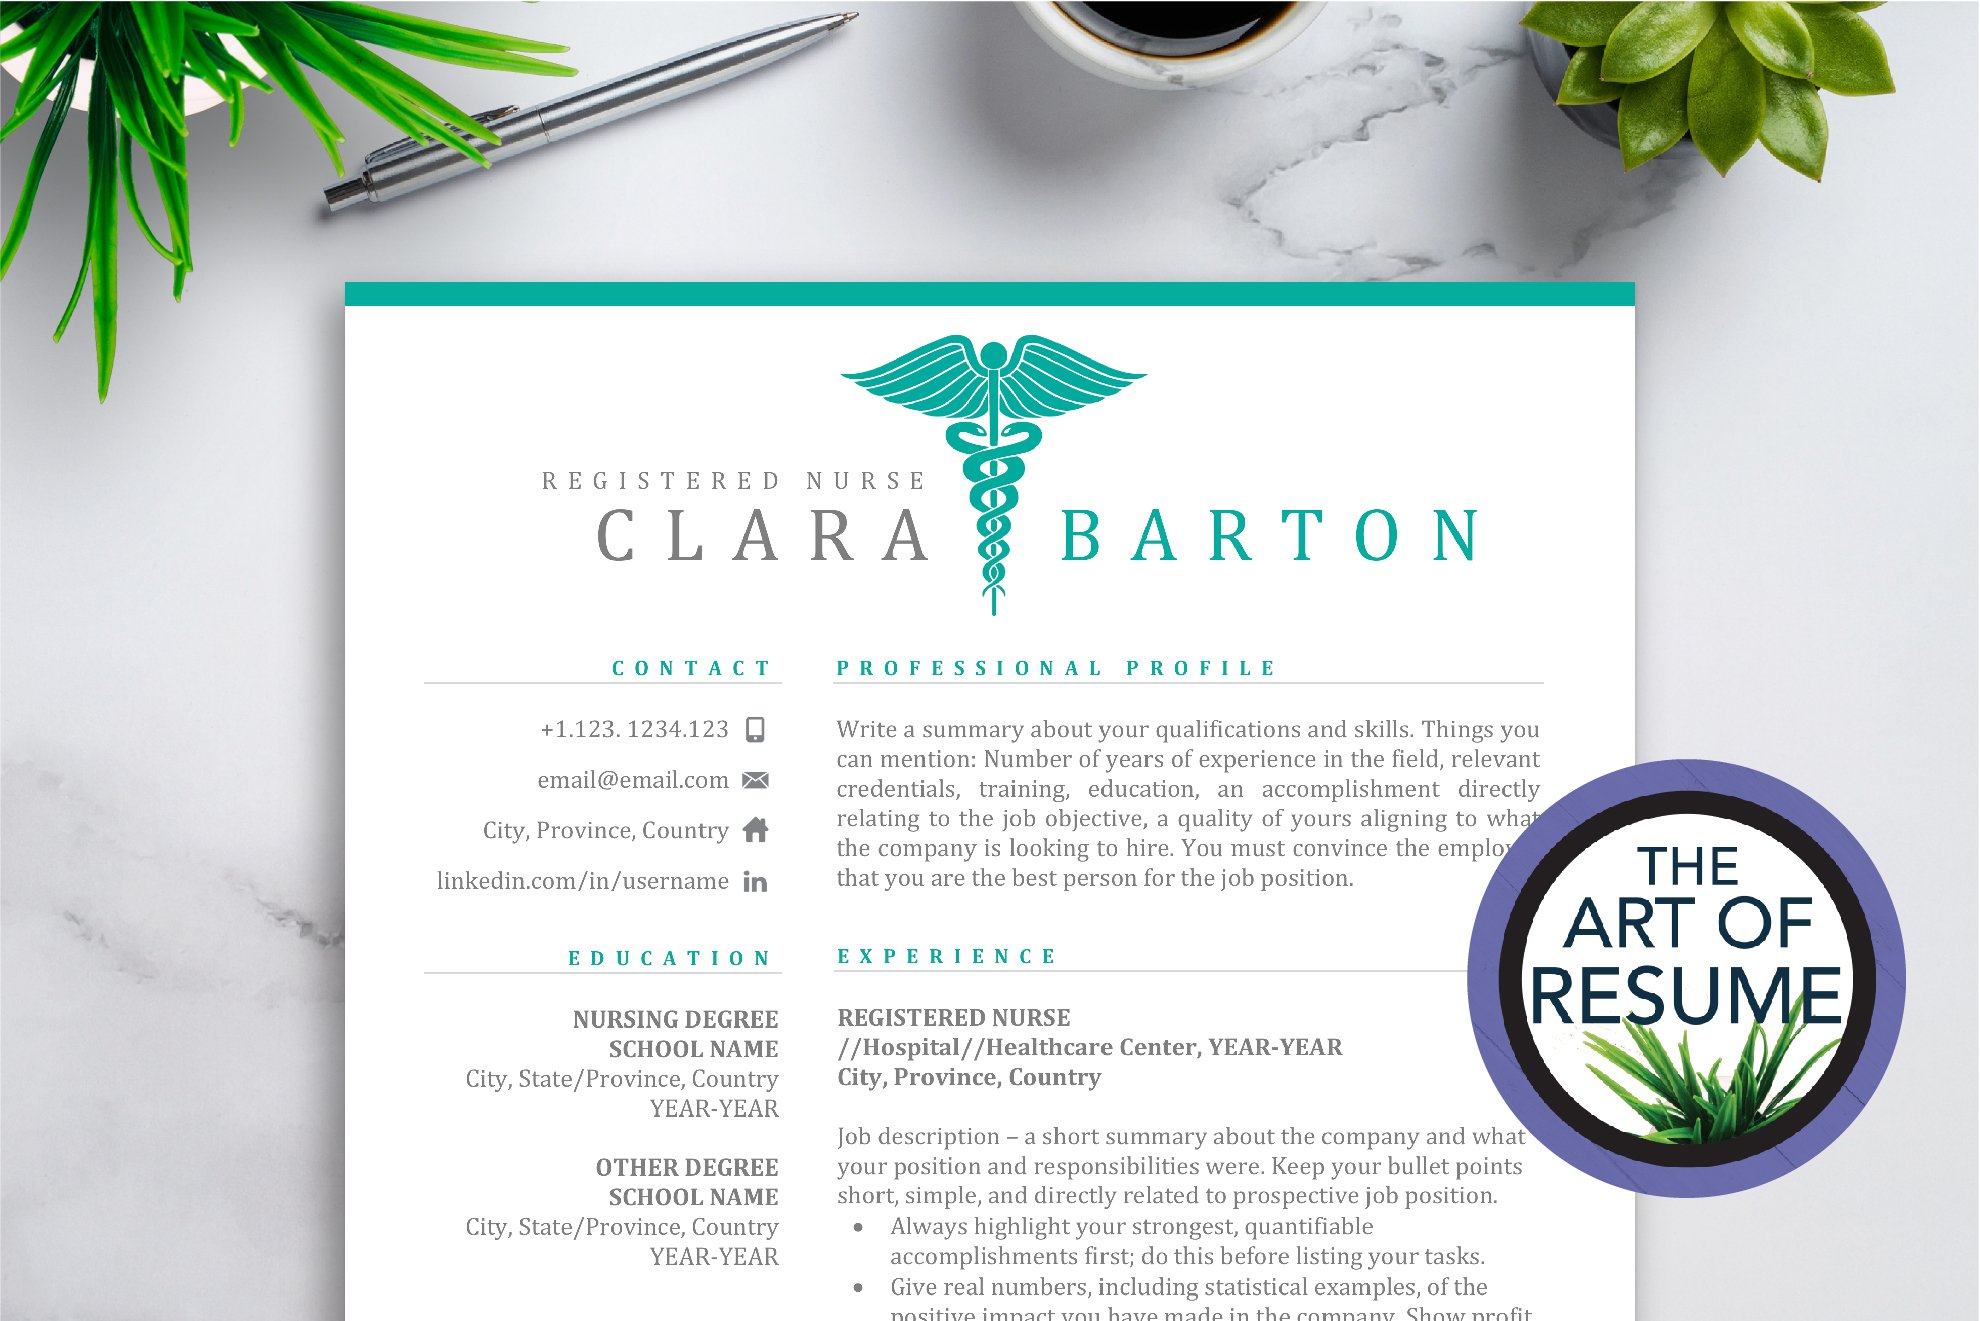 Professional resume with a green medical symbol.